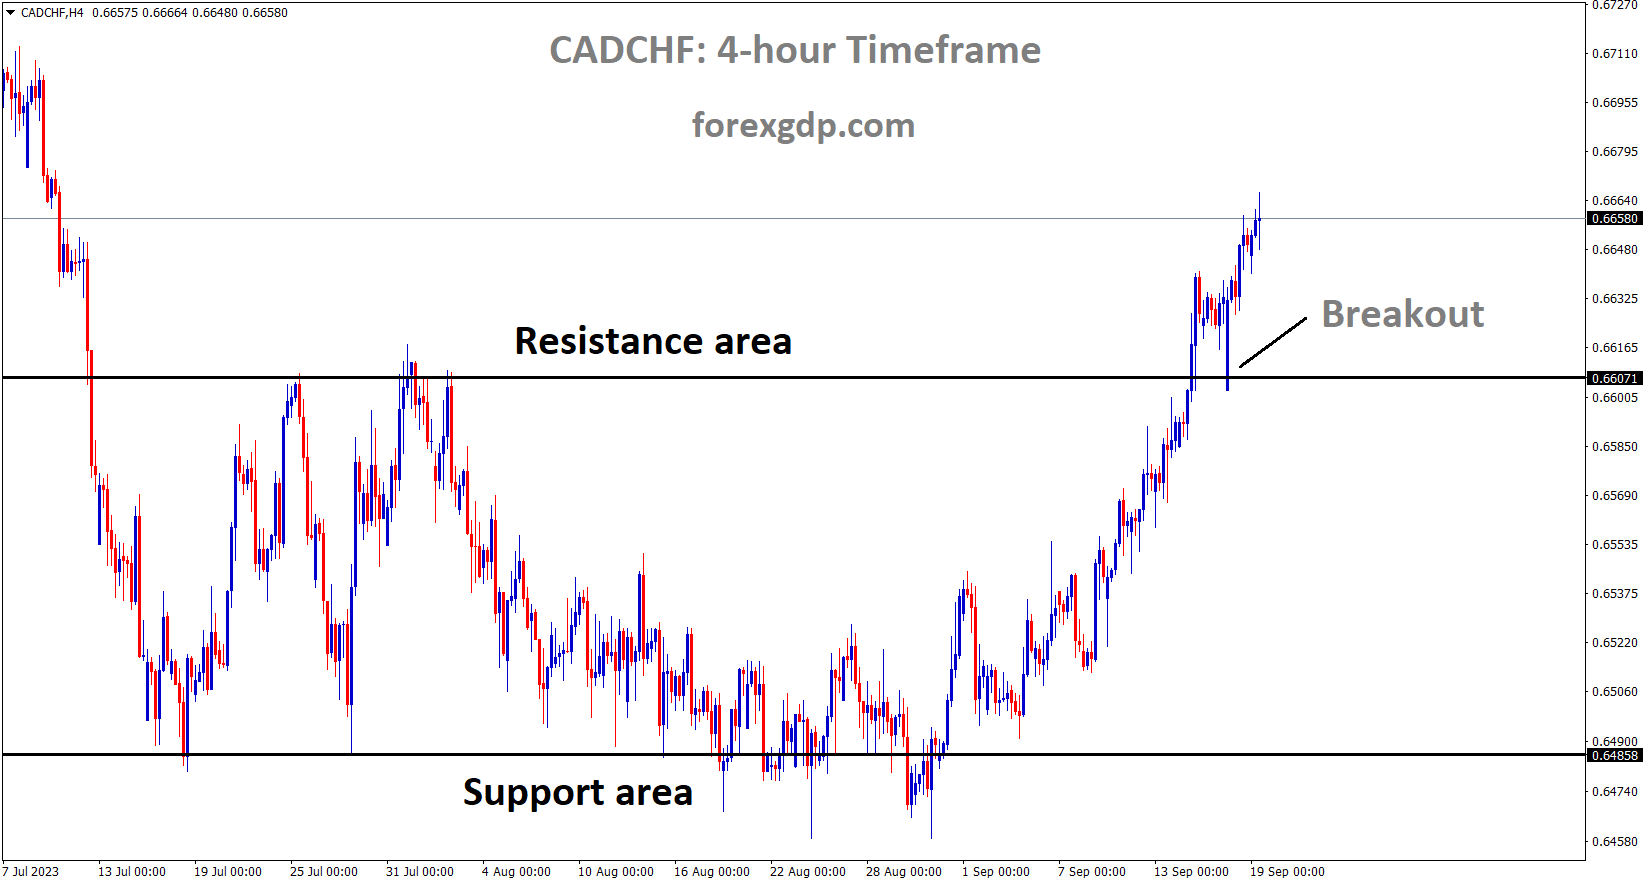 CADCHF has broken the Box pattern in upside